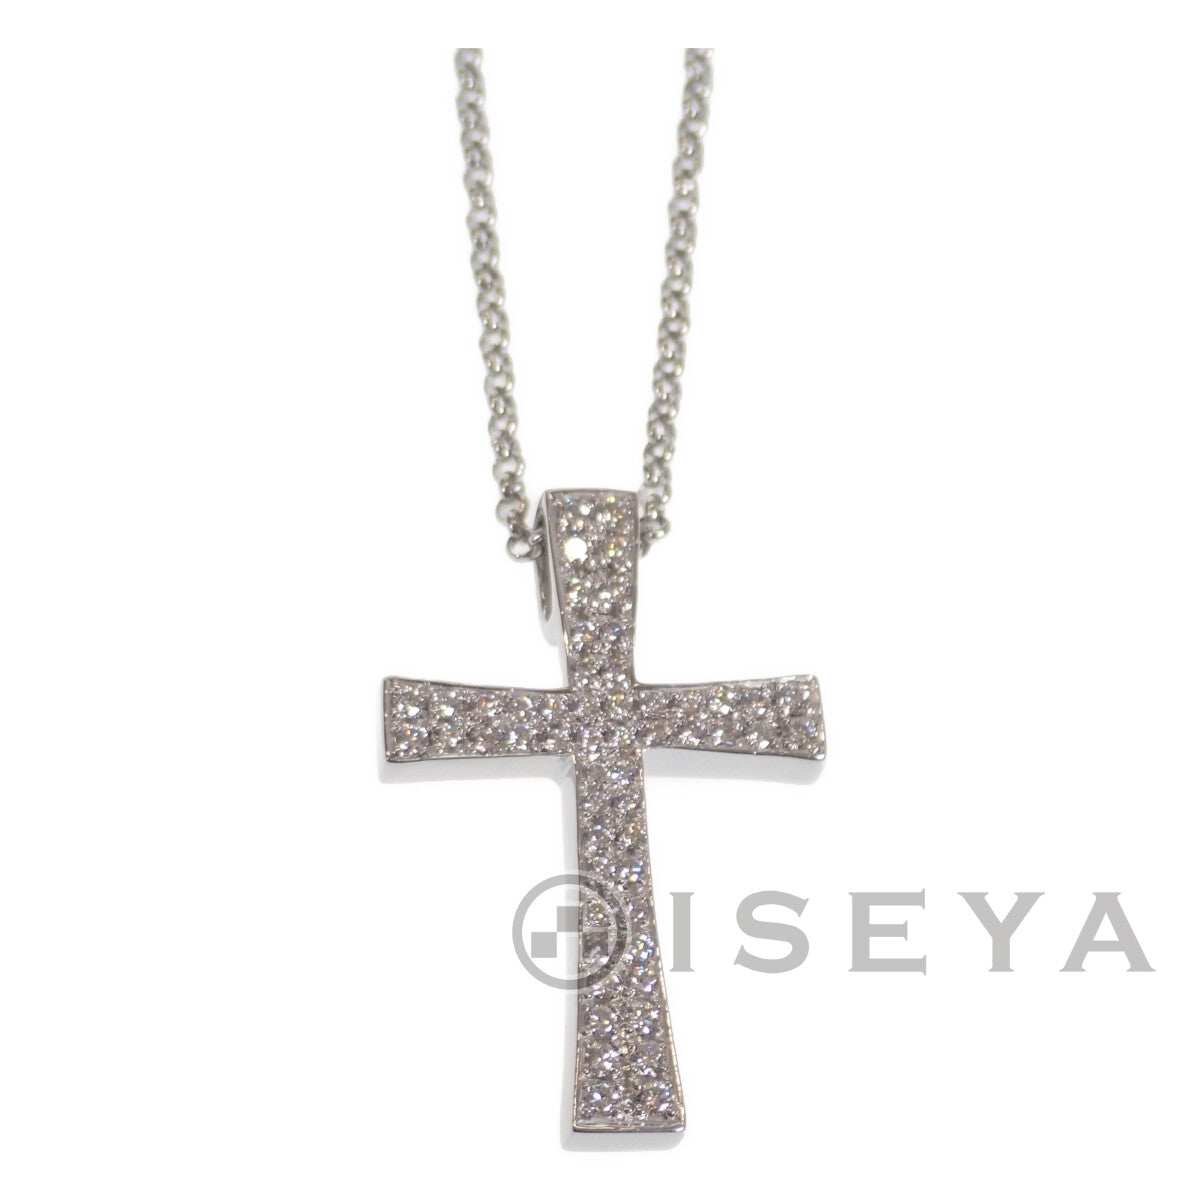 Unique Cross Design D0.667ct Necklace in K18 White Gold with Diamonds for Women